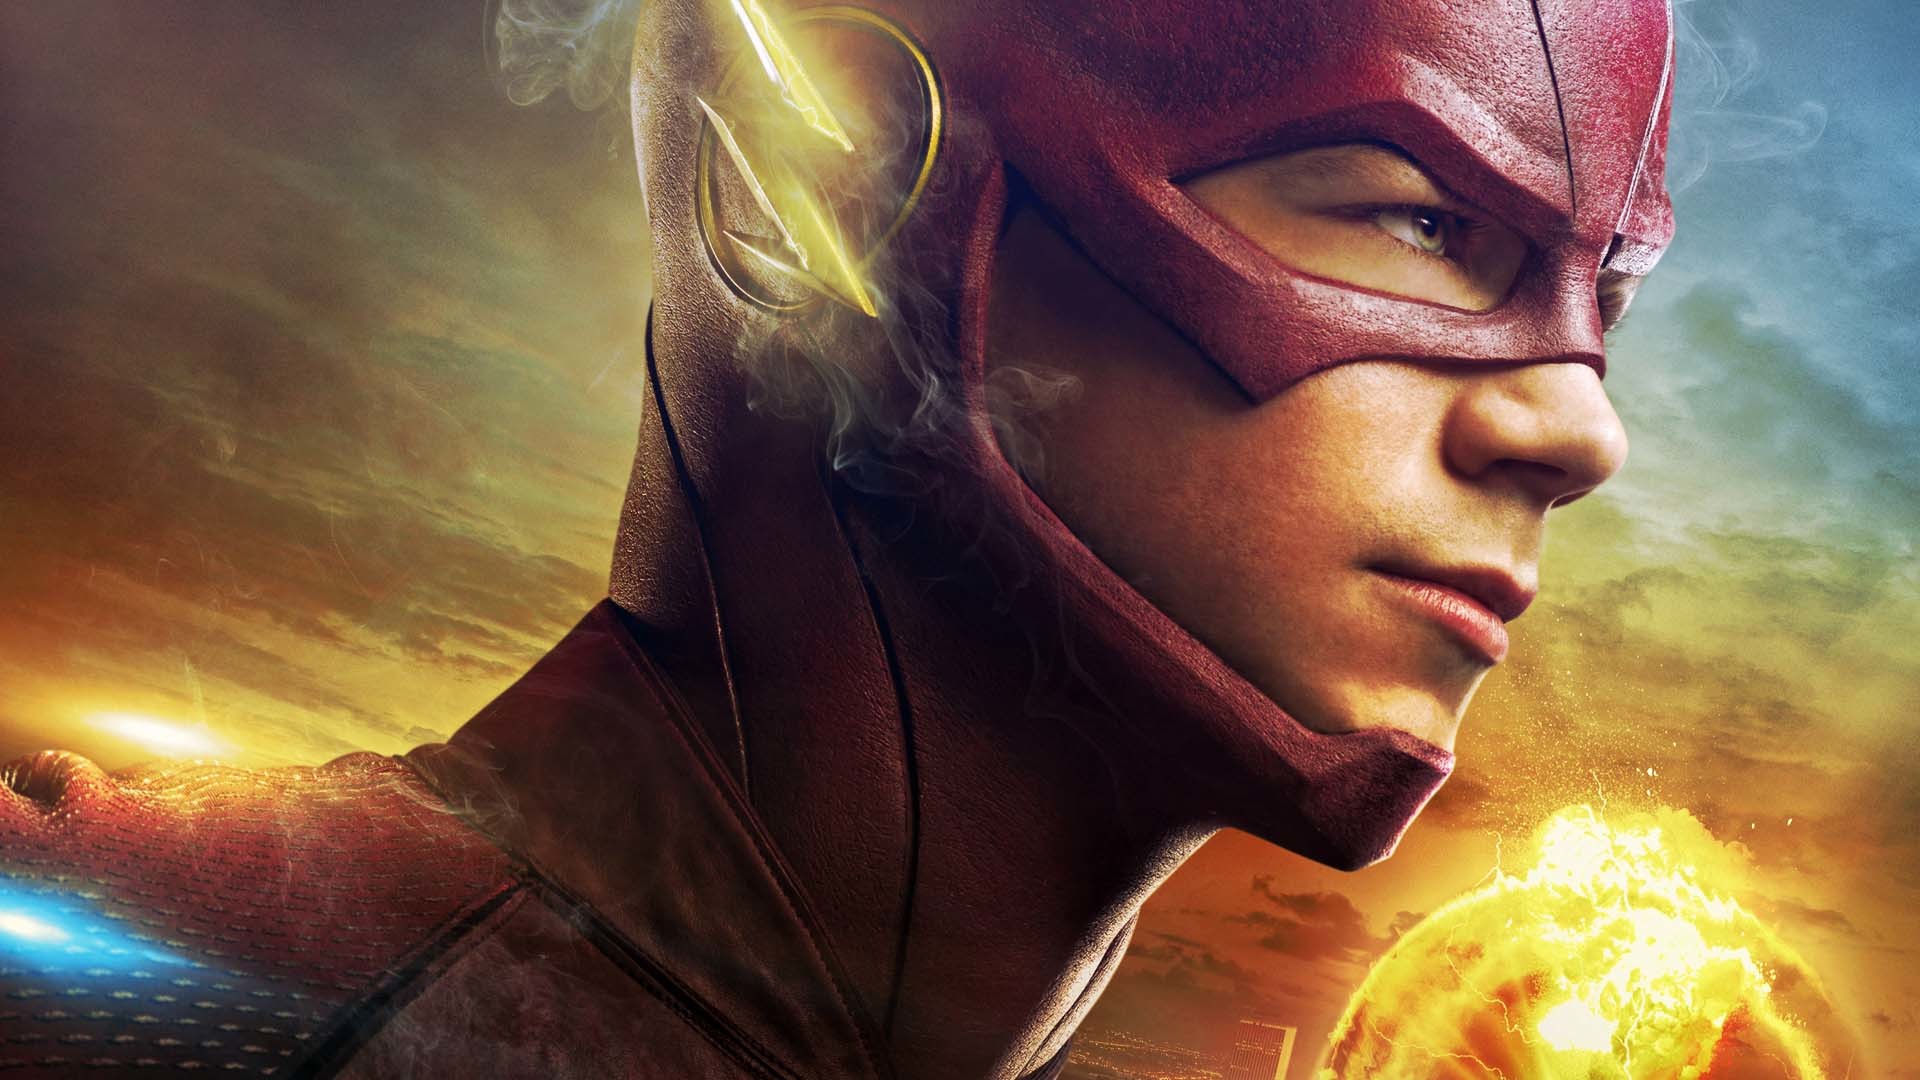 The Major Theme Of The Flash Season 2 How A Superhero Deals With Fame